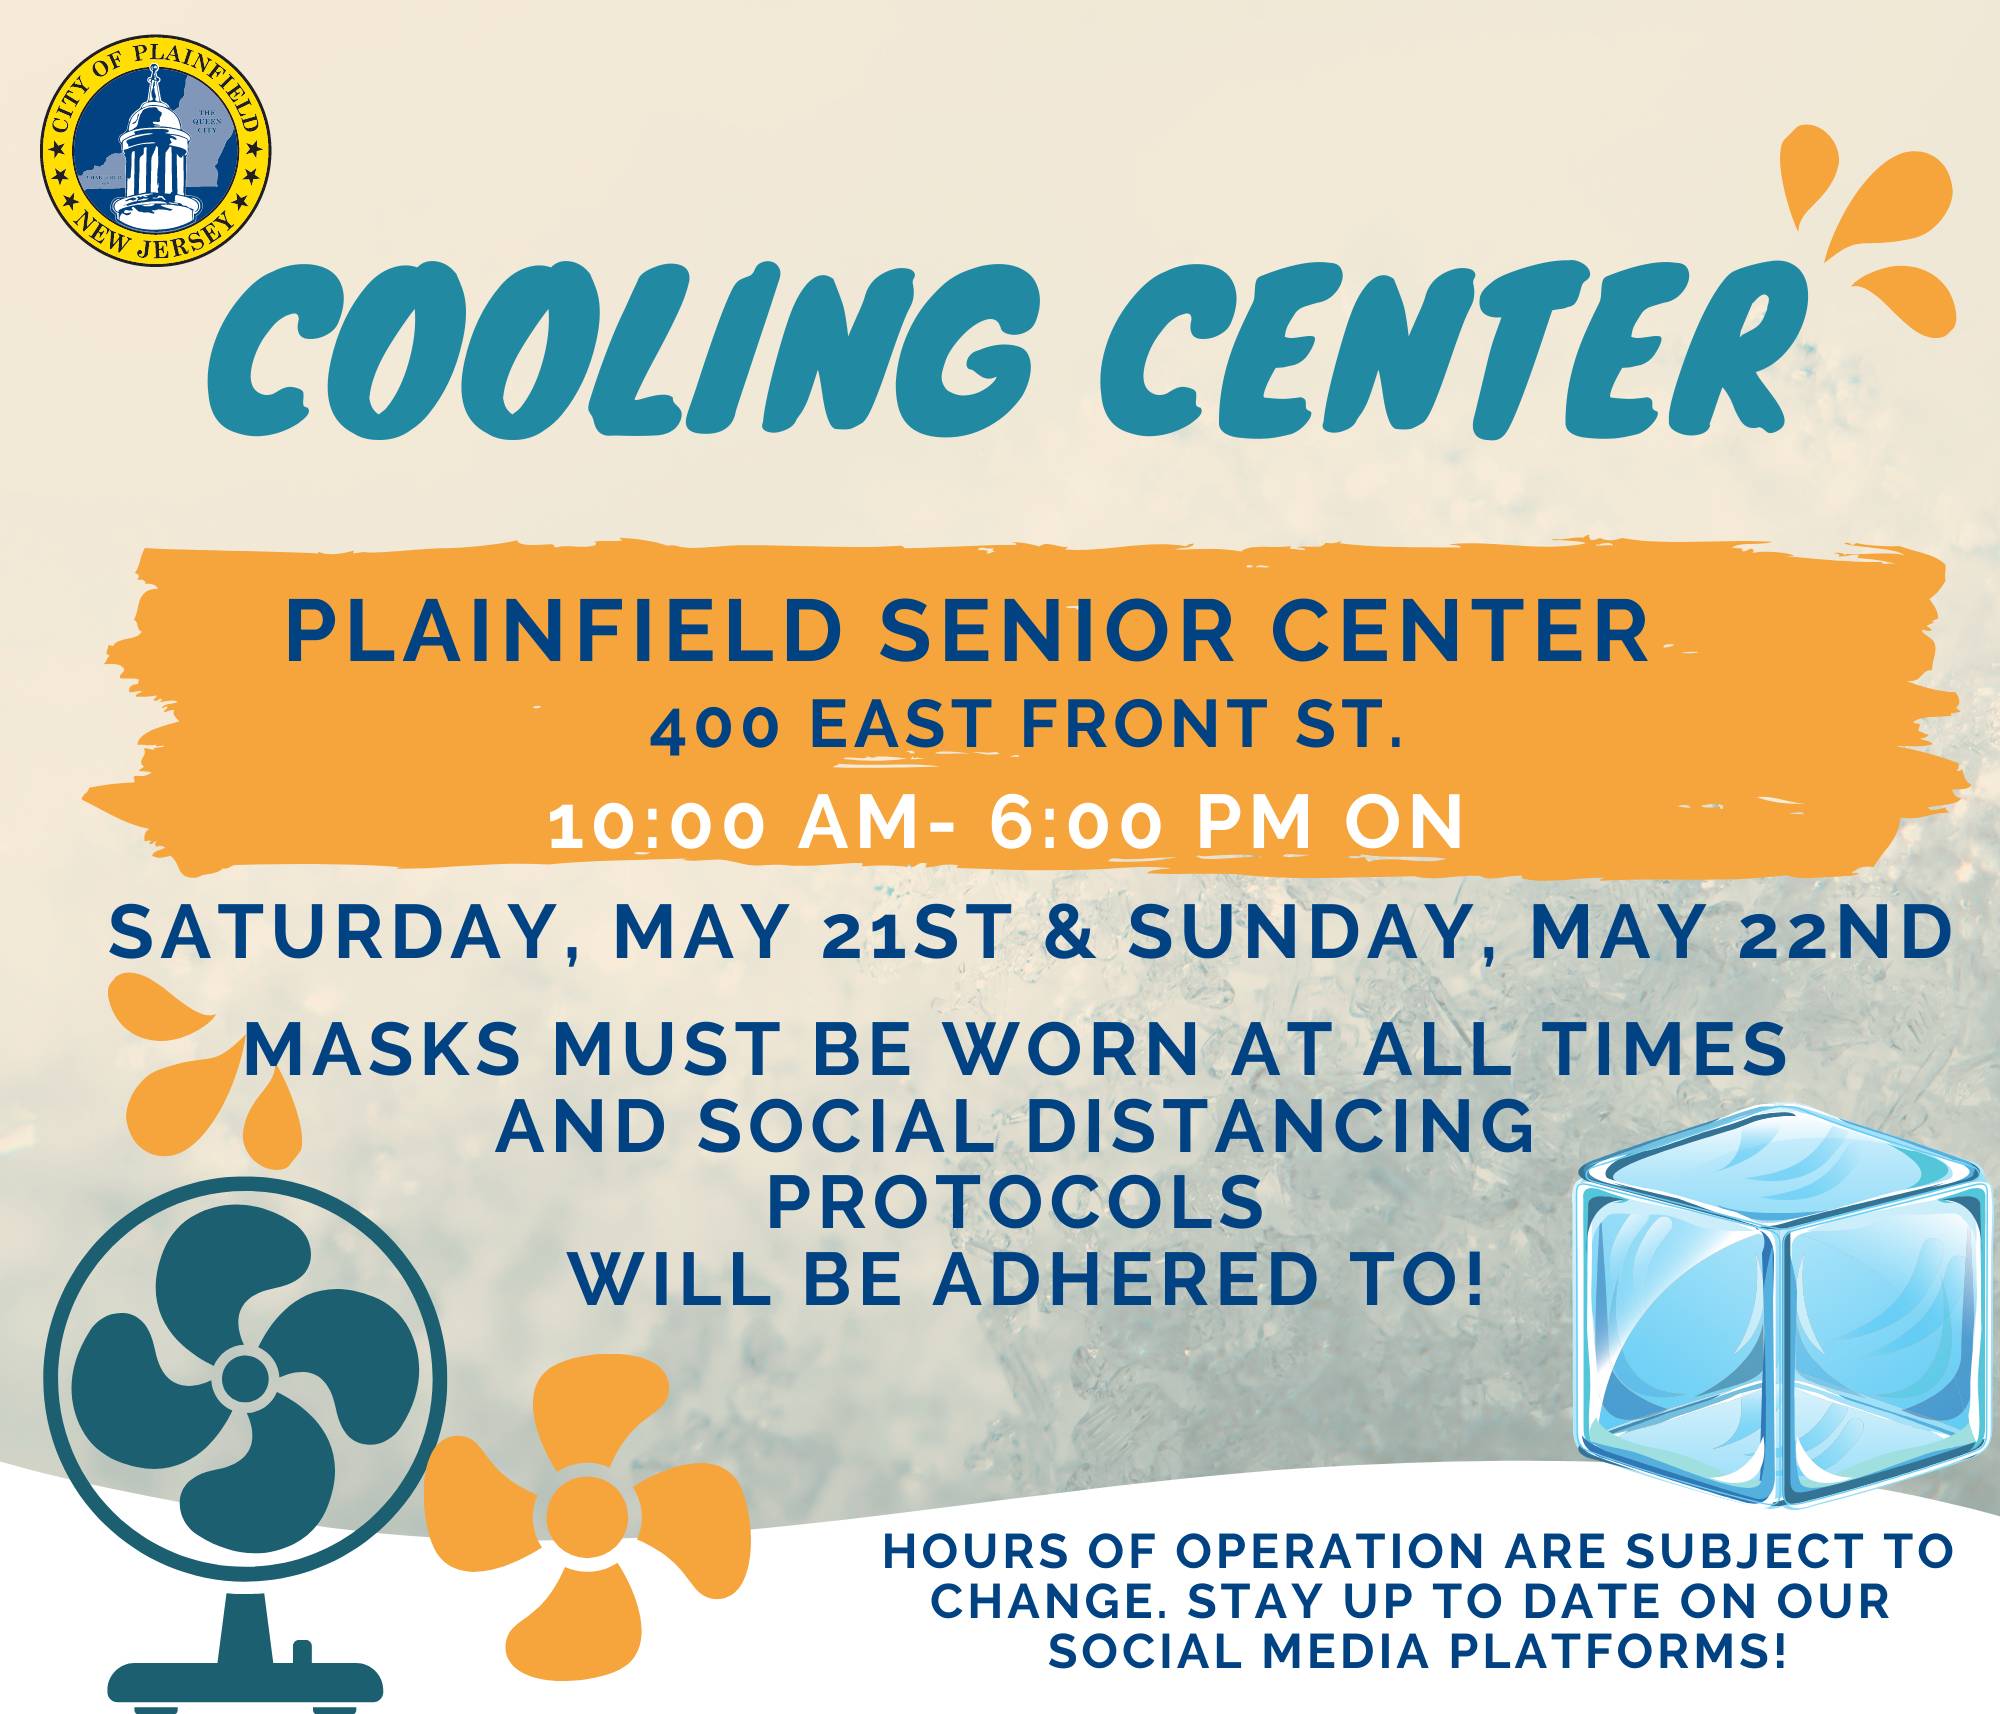 COOLING CENTER MAY 21-22 ENGL - Copy